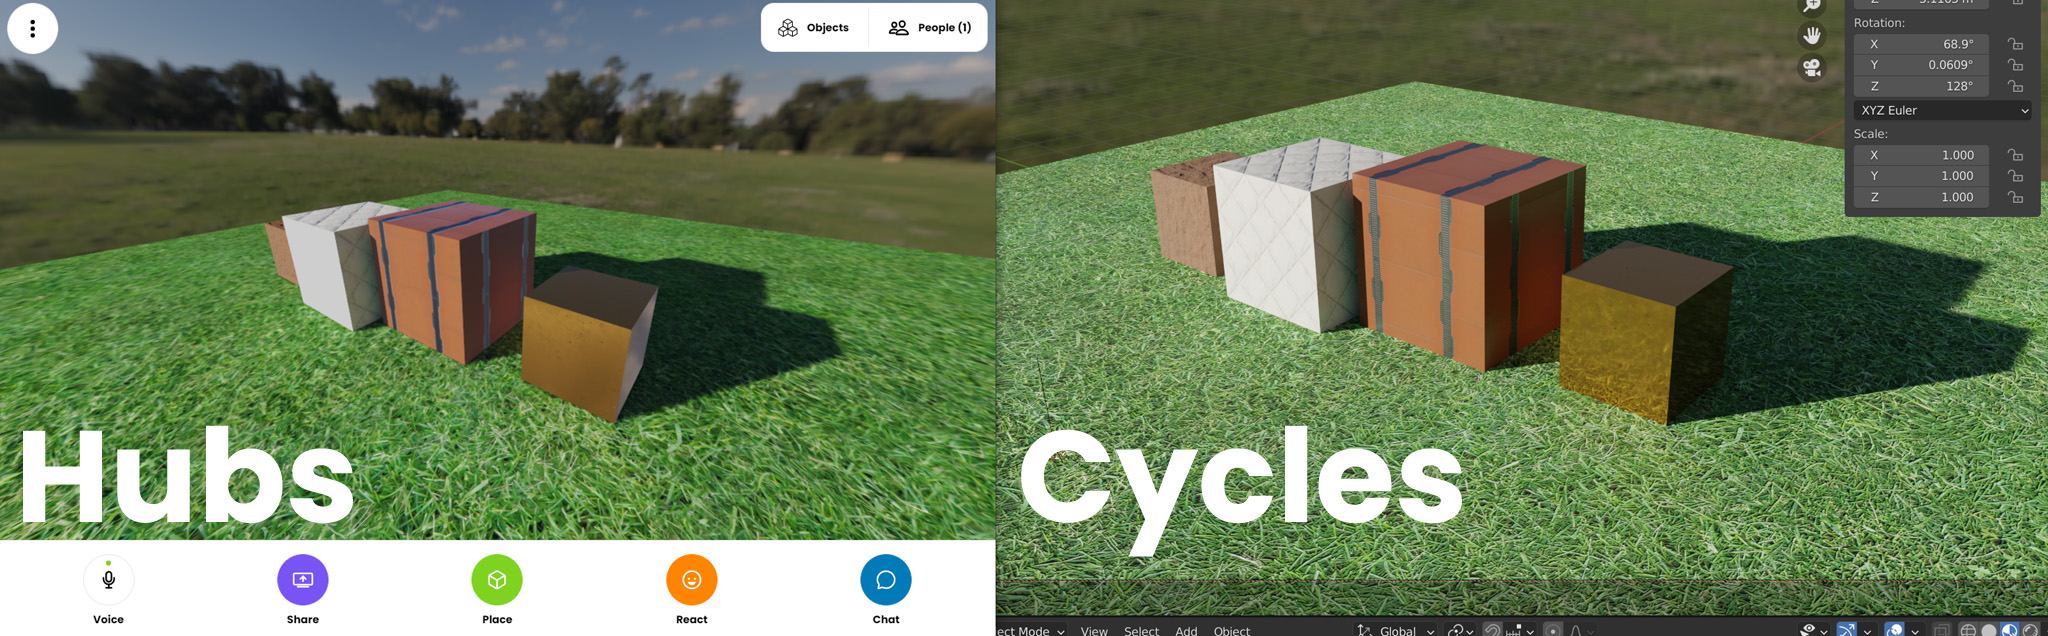 Cycles and Mozilla Hubs comparison.